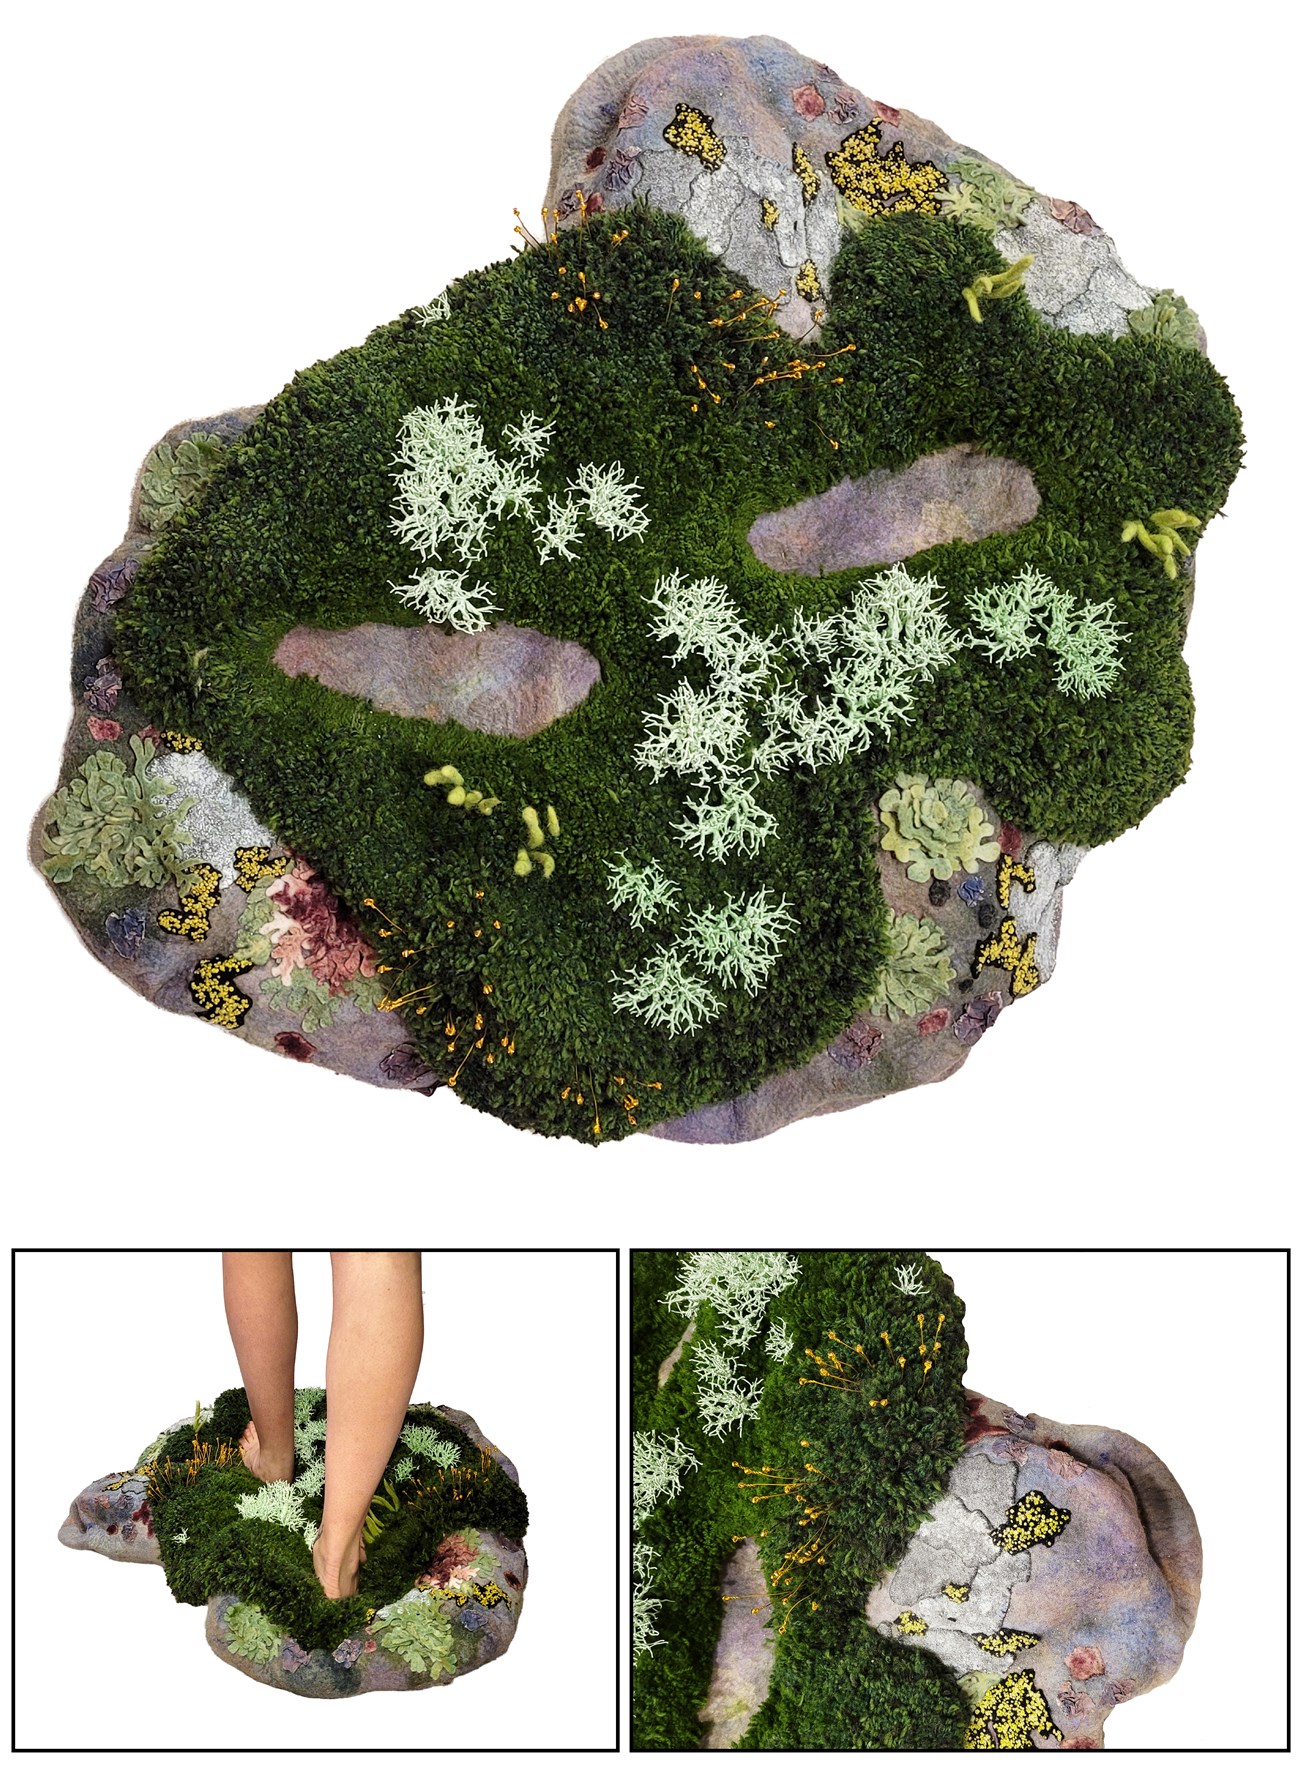 Three images of a textile artwork depicting rocks, plants and lichen